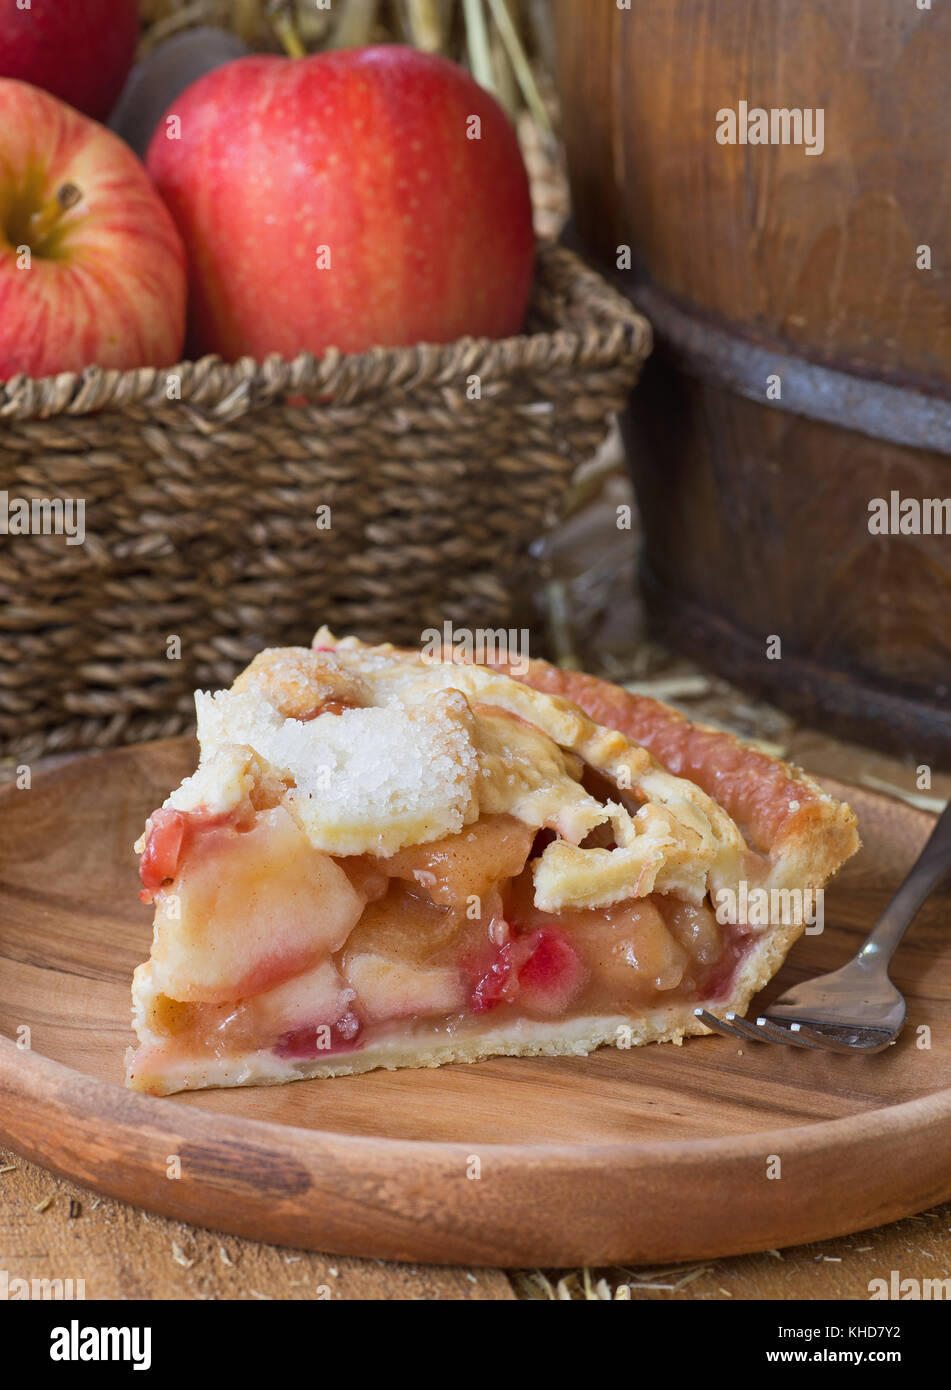 Slice of apple cranberry pie on a wooden plate Stock Photo